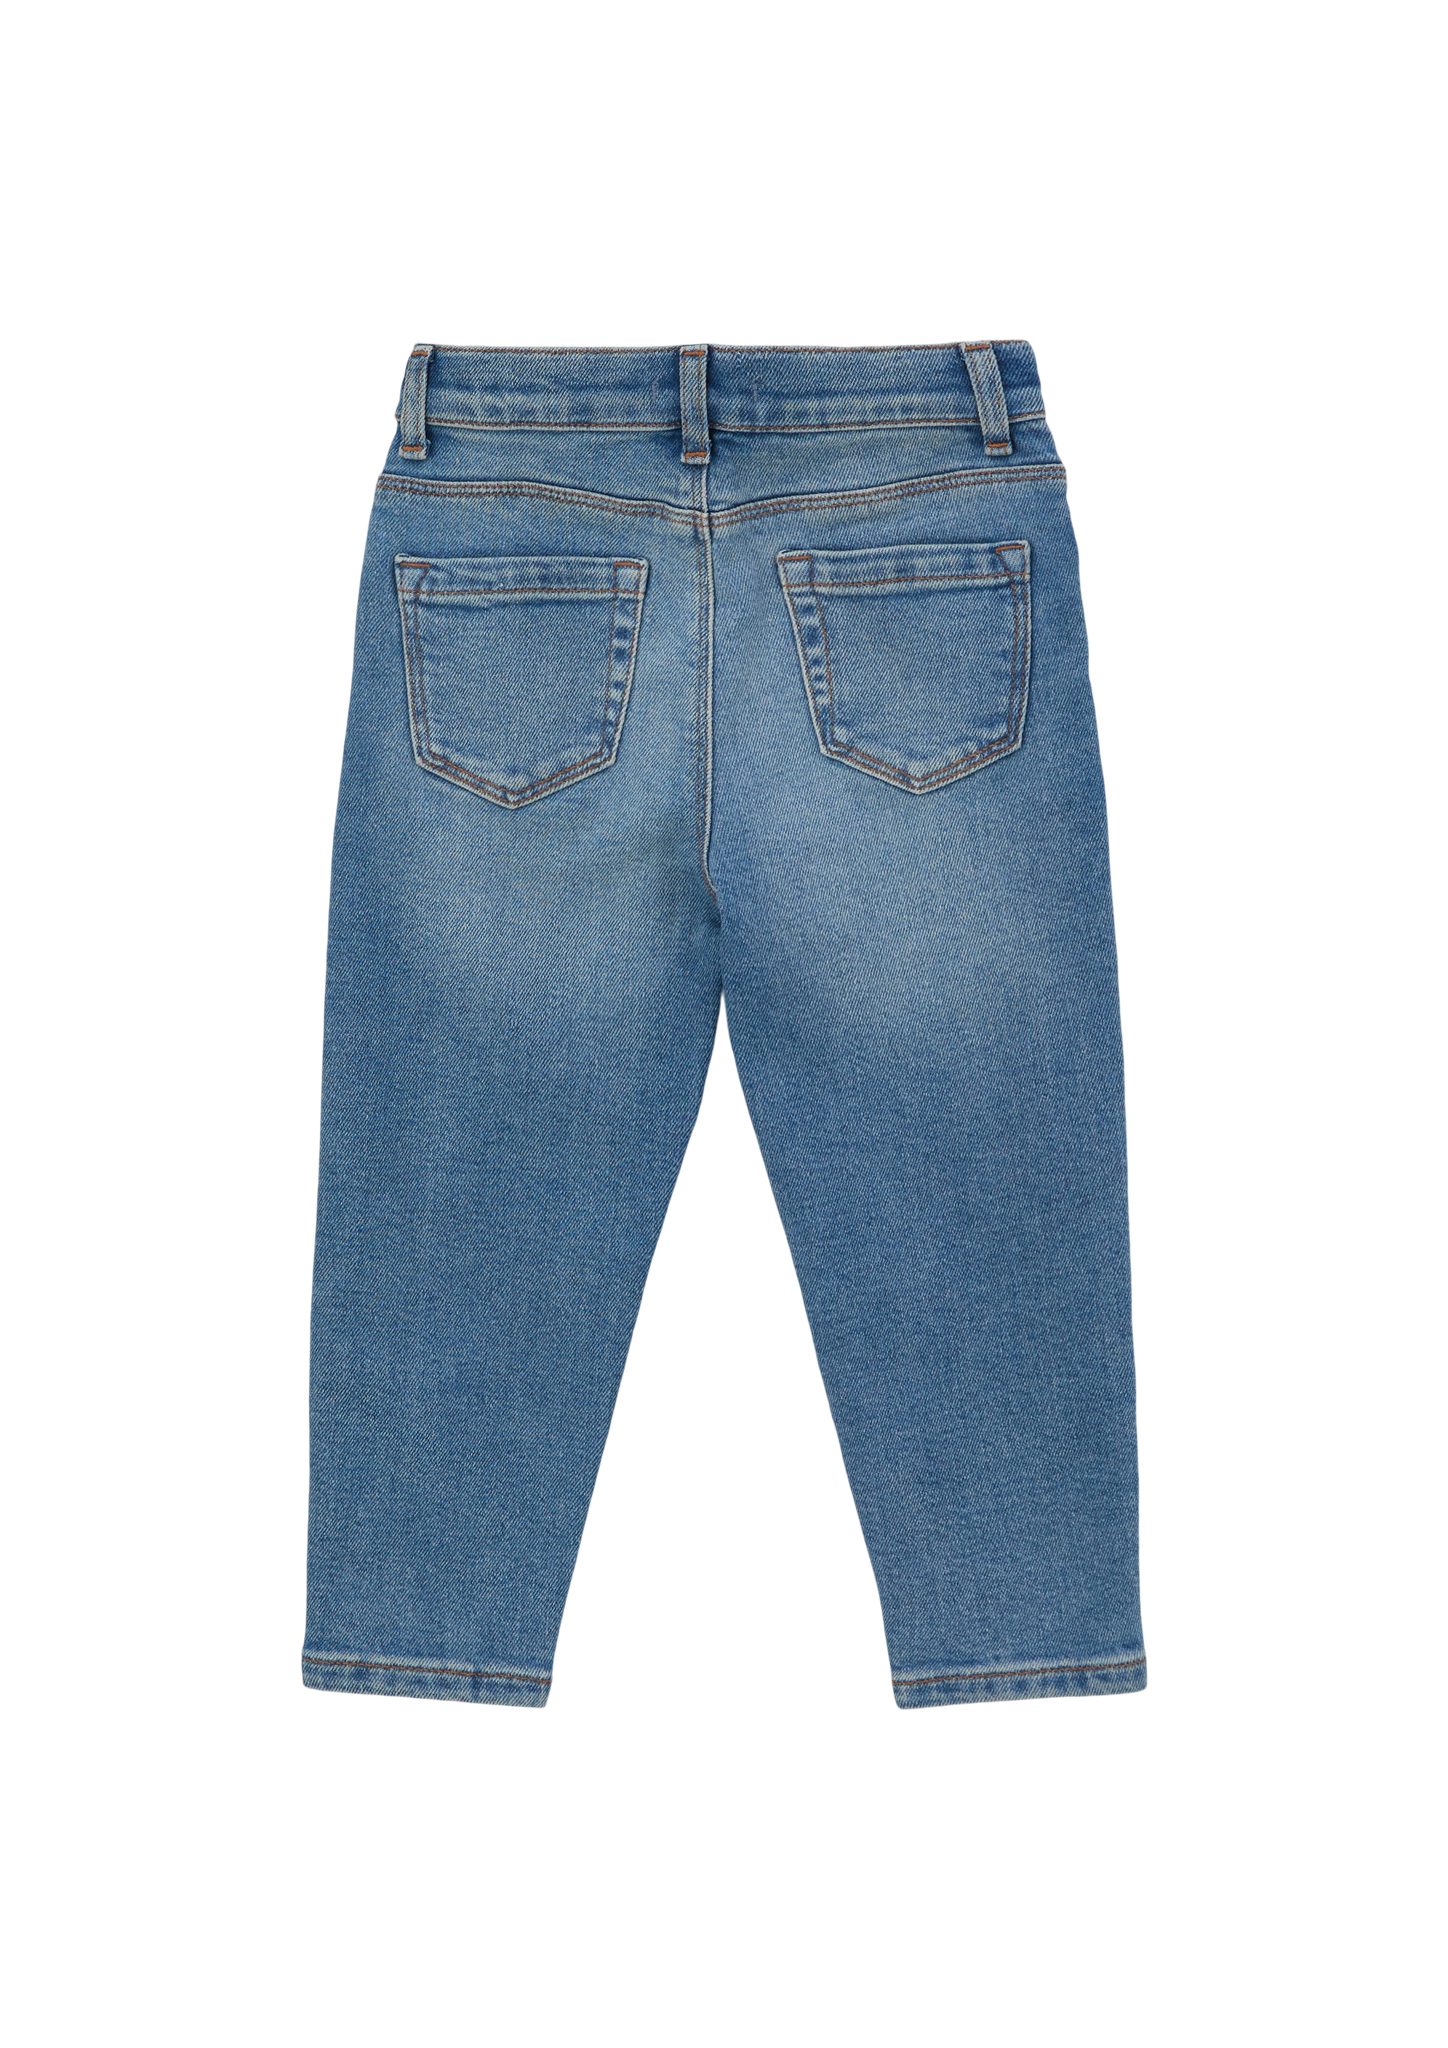 / Stoffhose Kontrastnähte Mom Tapered Fit Waschung, Rise Ankle-Jeans Relaxed Leg / s.Oliver High /